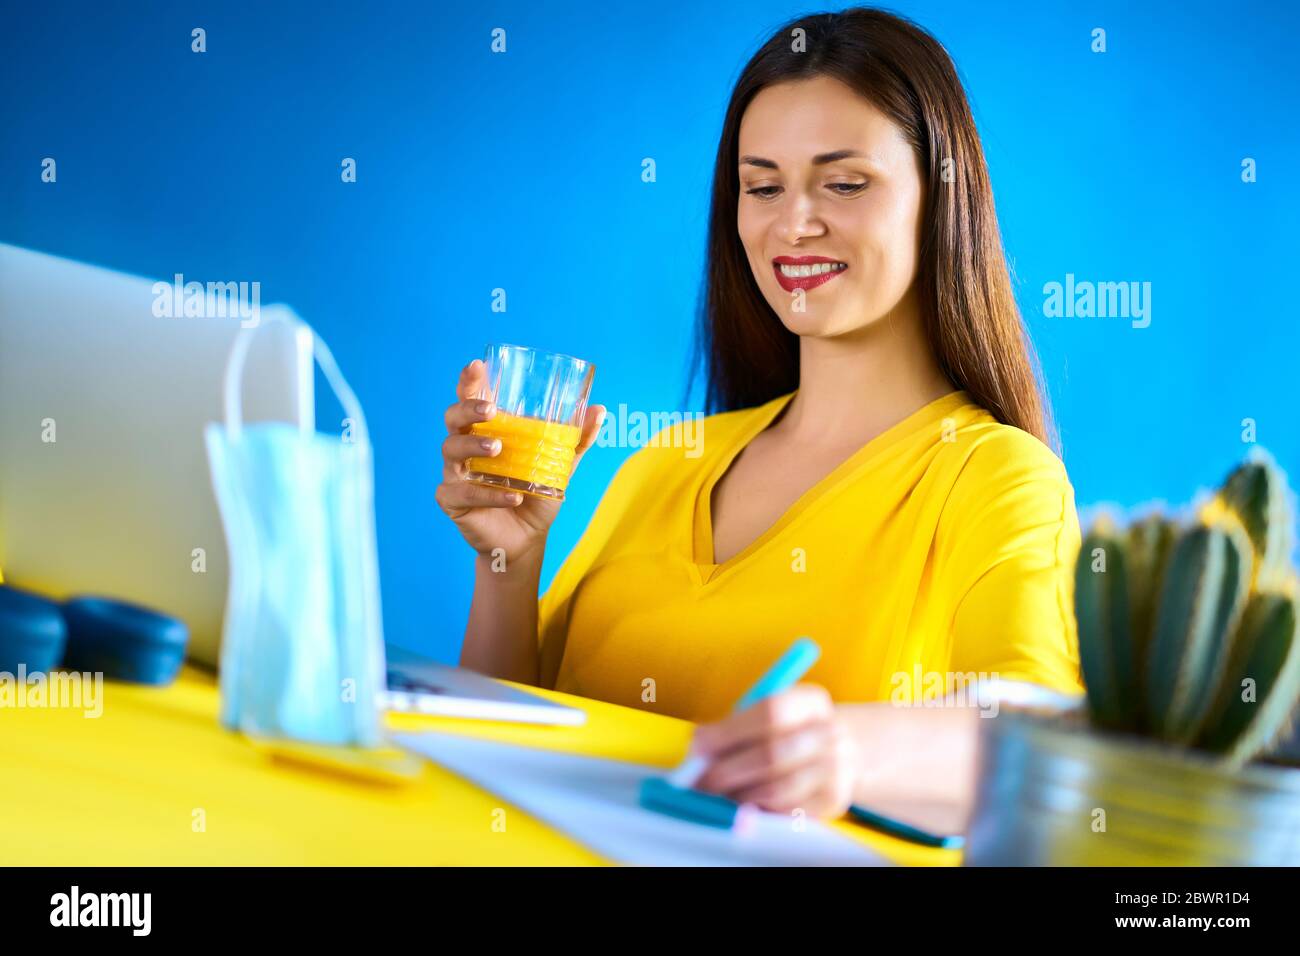 woman drinks juice and works during quarantine Stock Photo